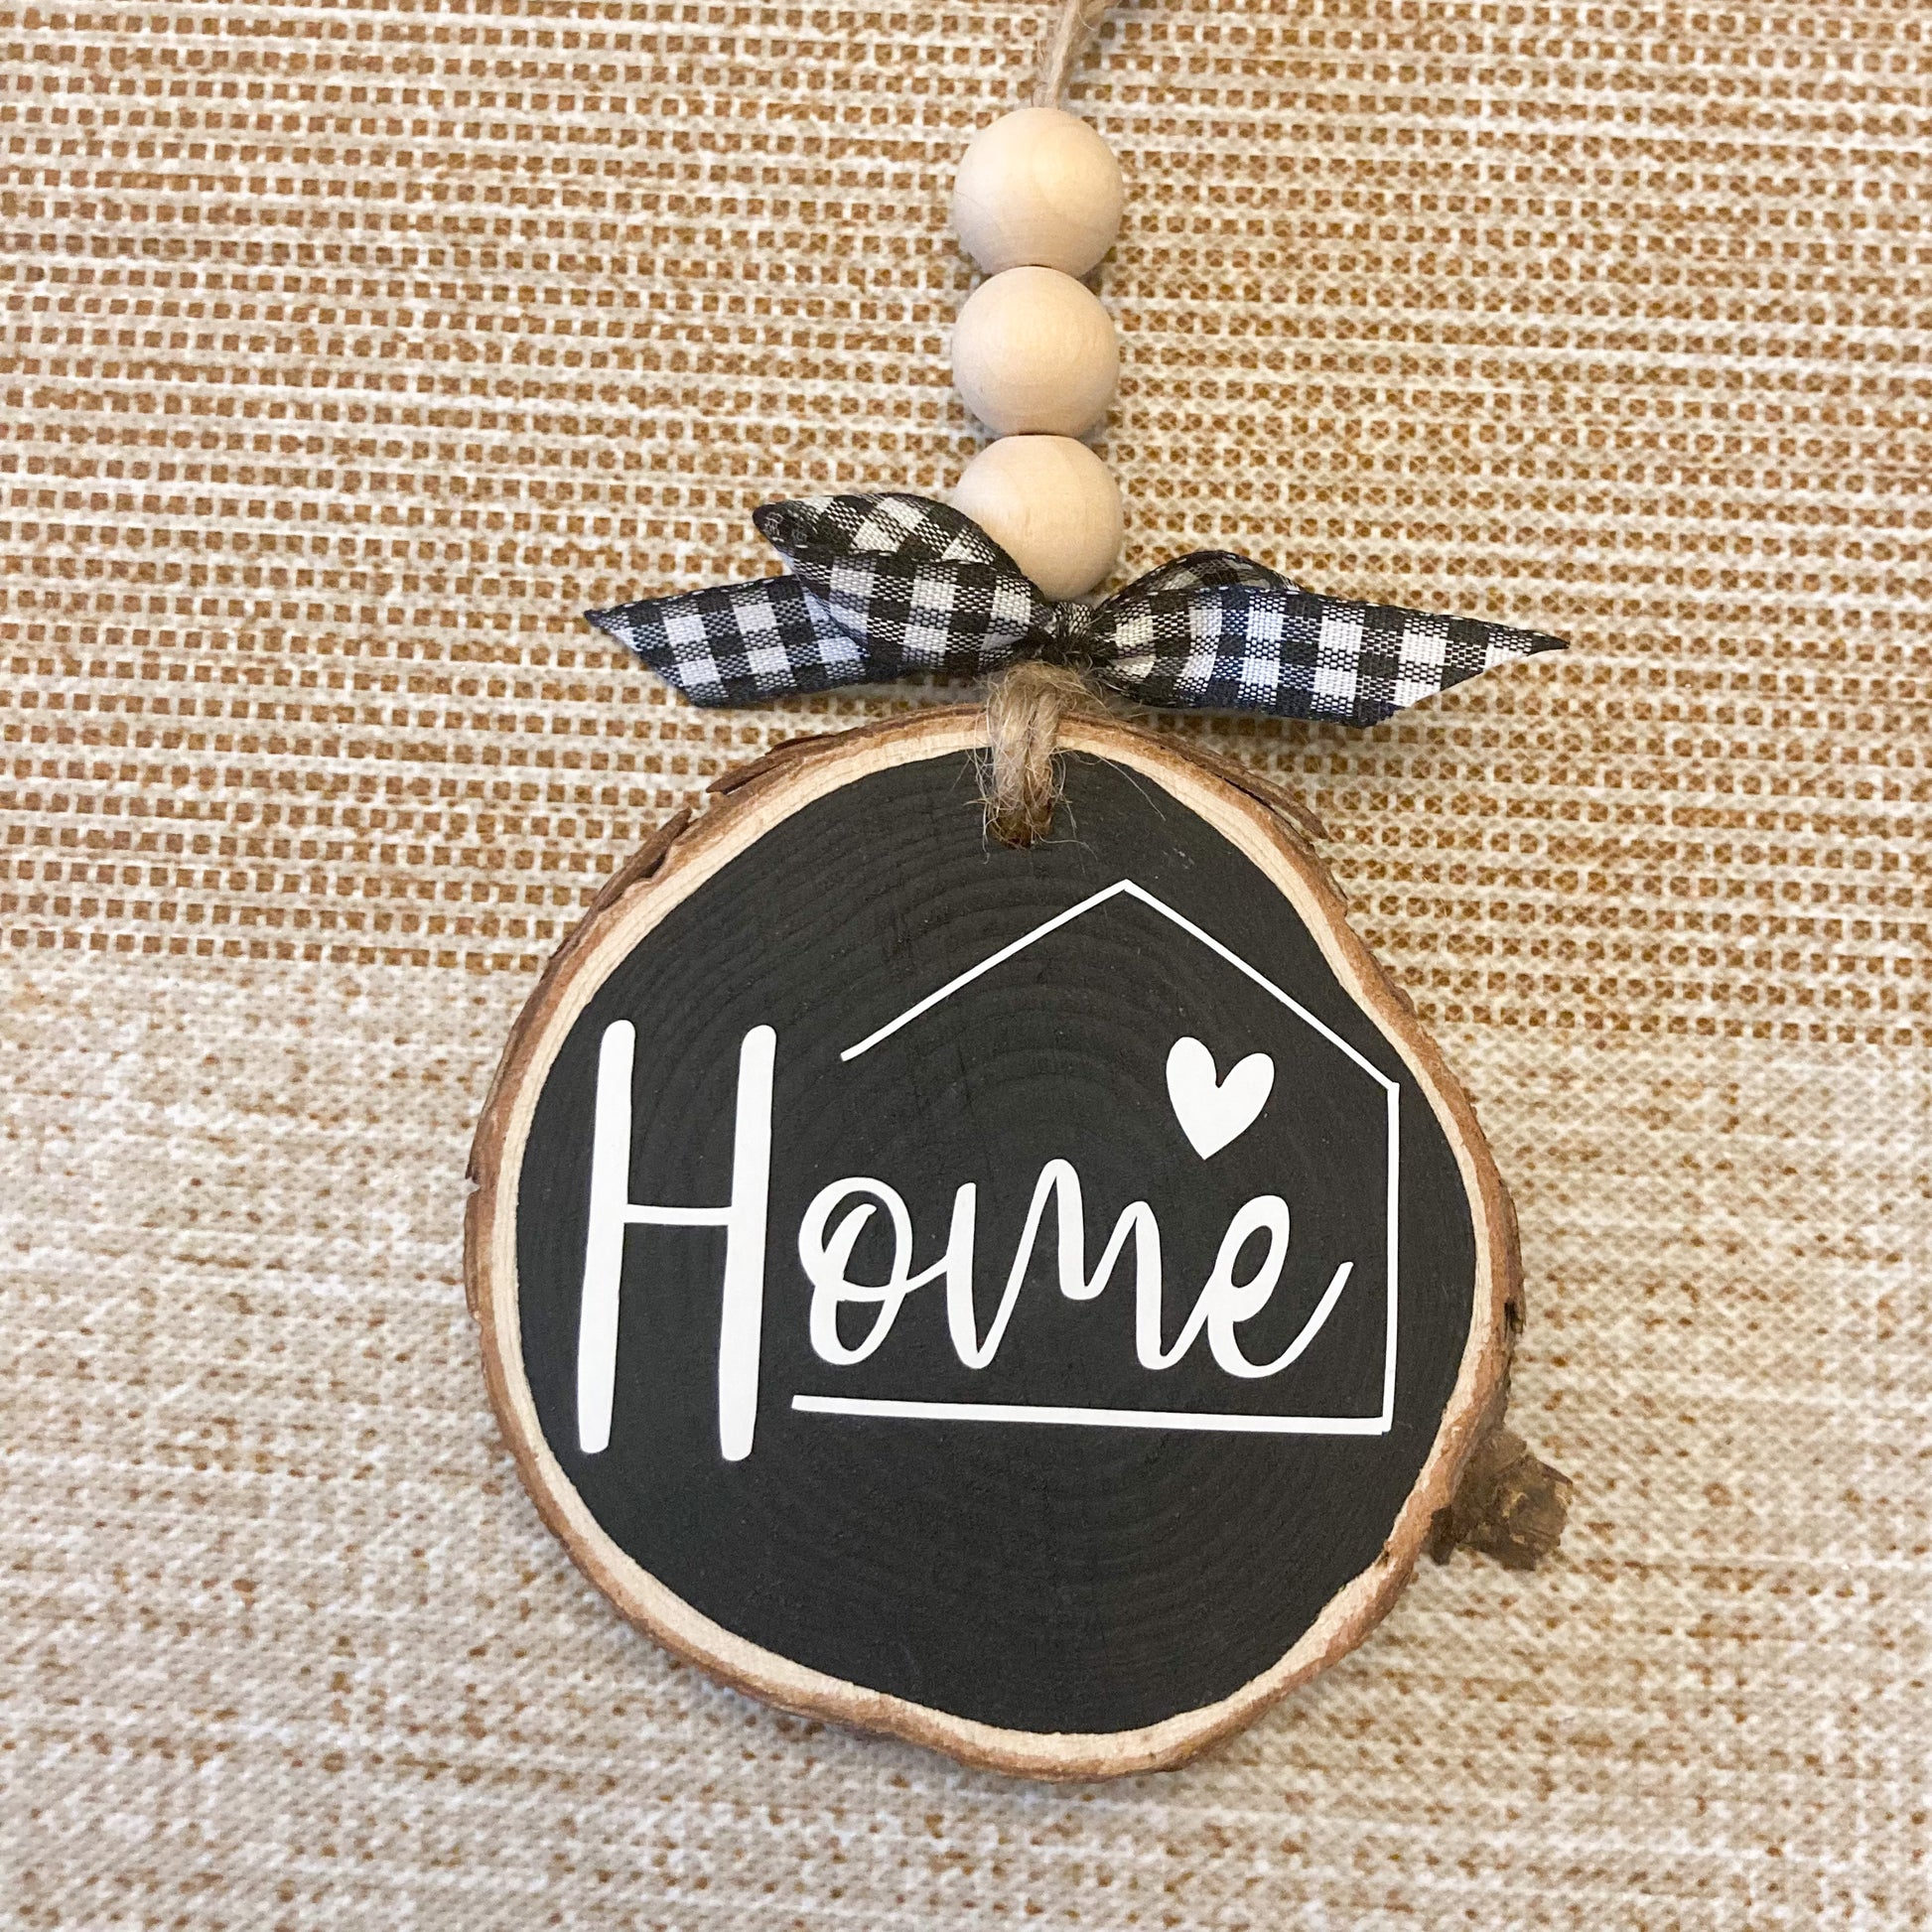 Handmade home ornament on 3 inch wood round painted black with white vinyl word Home jute twine hanger with wood beads and buffalo checkered bow